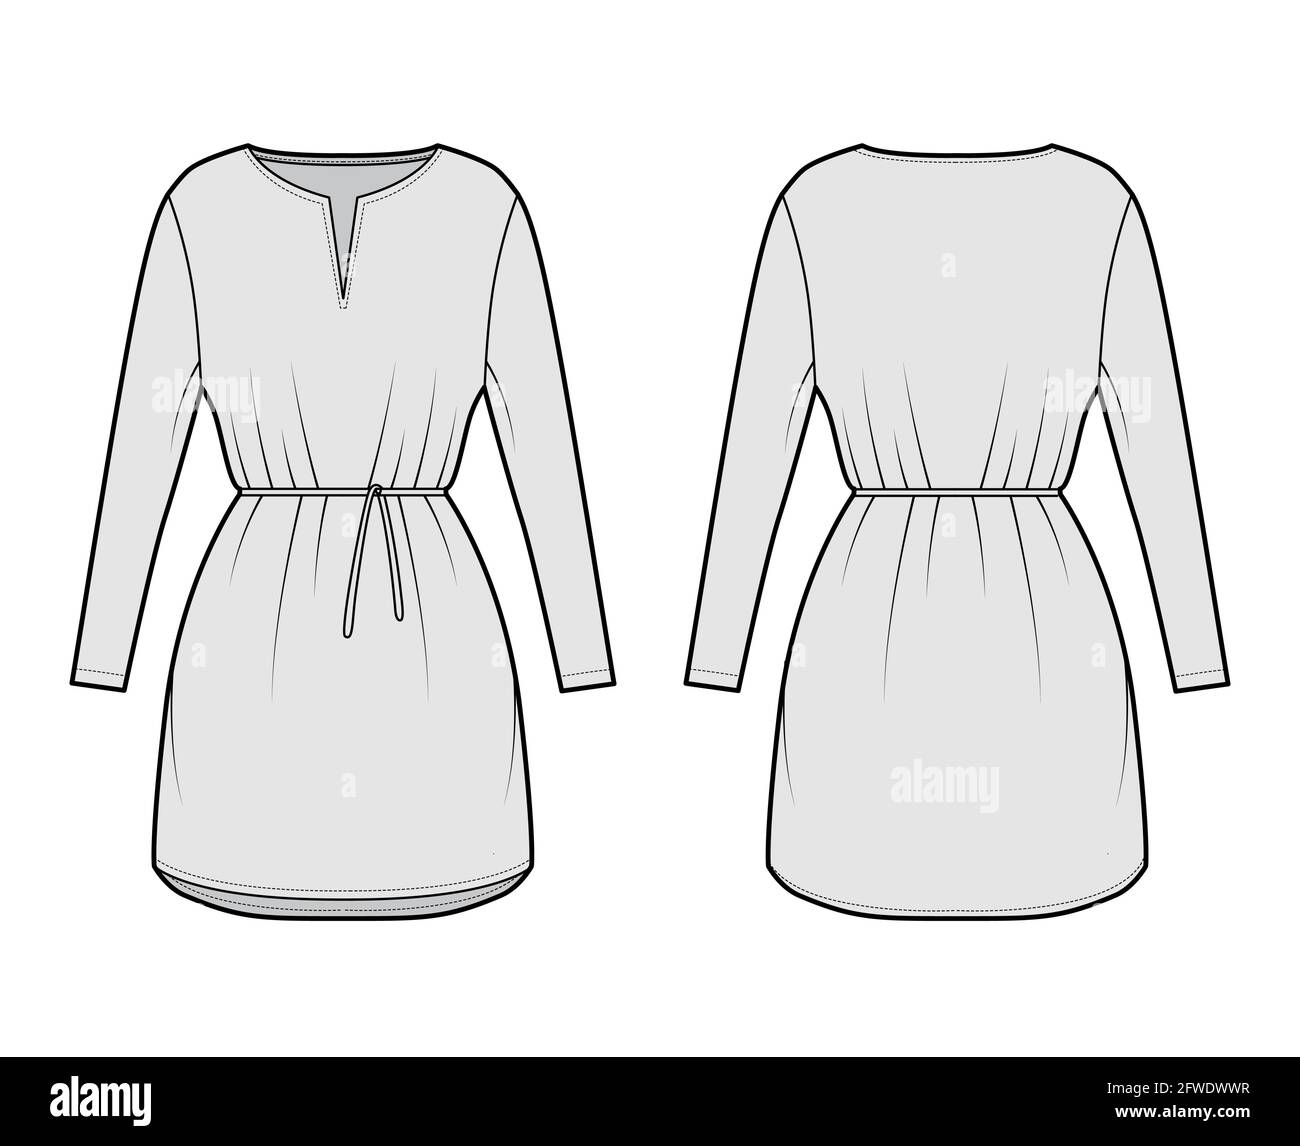 Dress tunic technical fashion illustration with tie, long sleeves, oversized body, mini length skirt, slashed neck. Flat apparel front, back, grey color style. Women, men CAD mockup Stock Vector